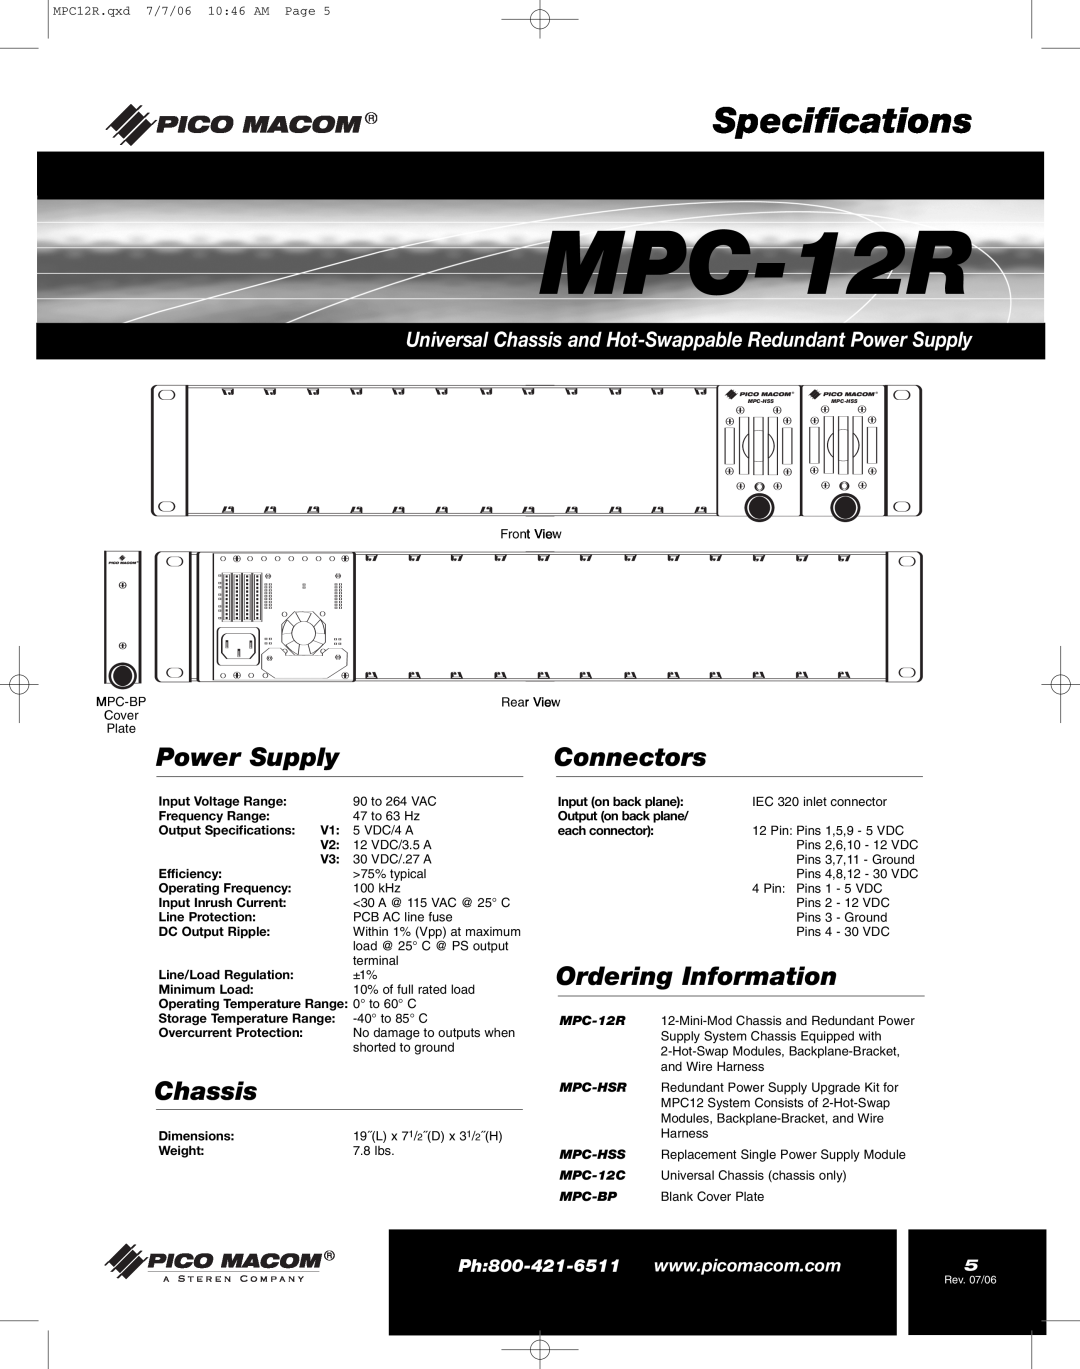 Pico Macom MPC-12R manual Specifications, Power Supply, Connectors, Chassis, Ordering Information 